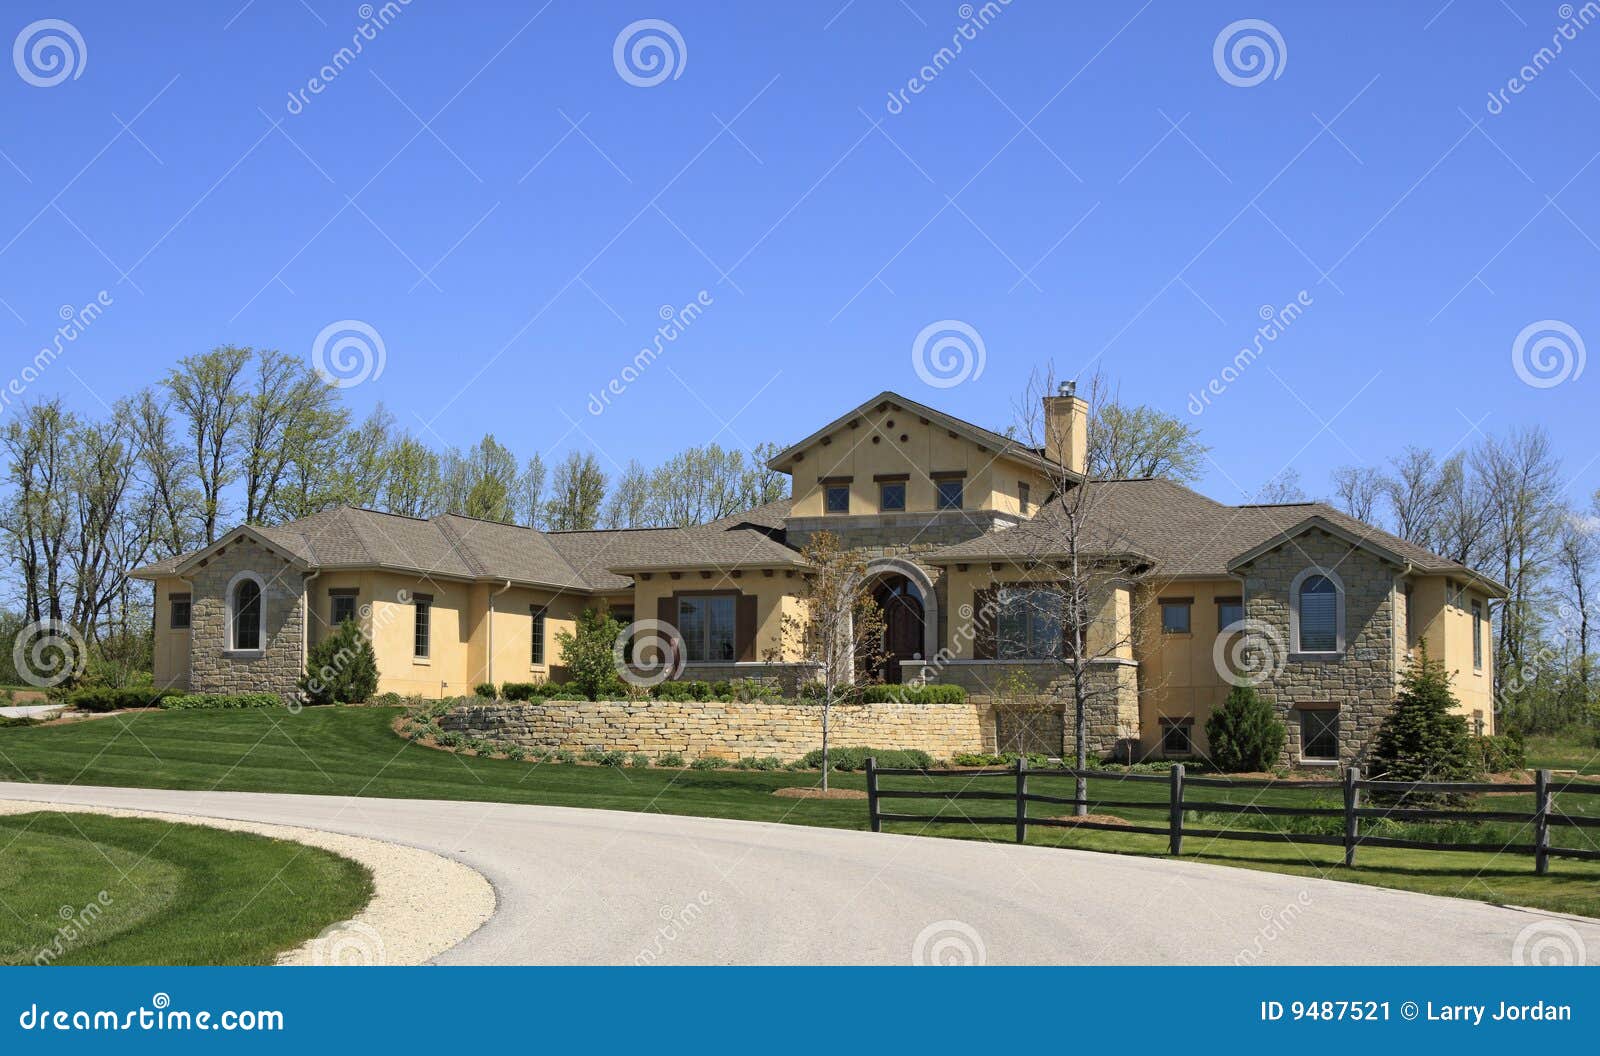 South Western Style Home Stock Image - Image: 9487521